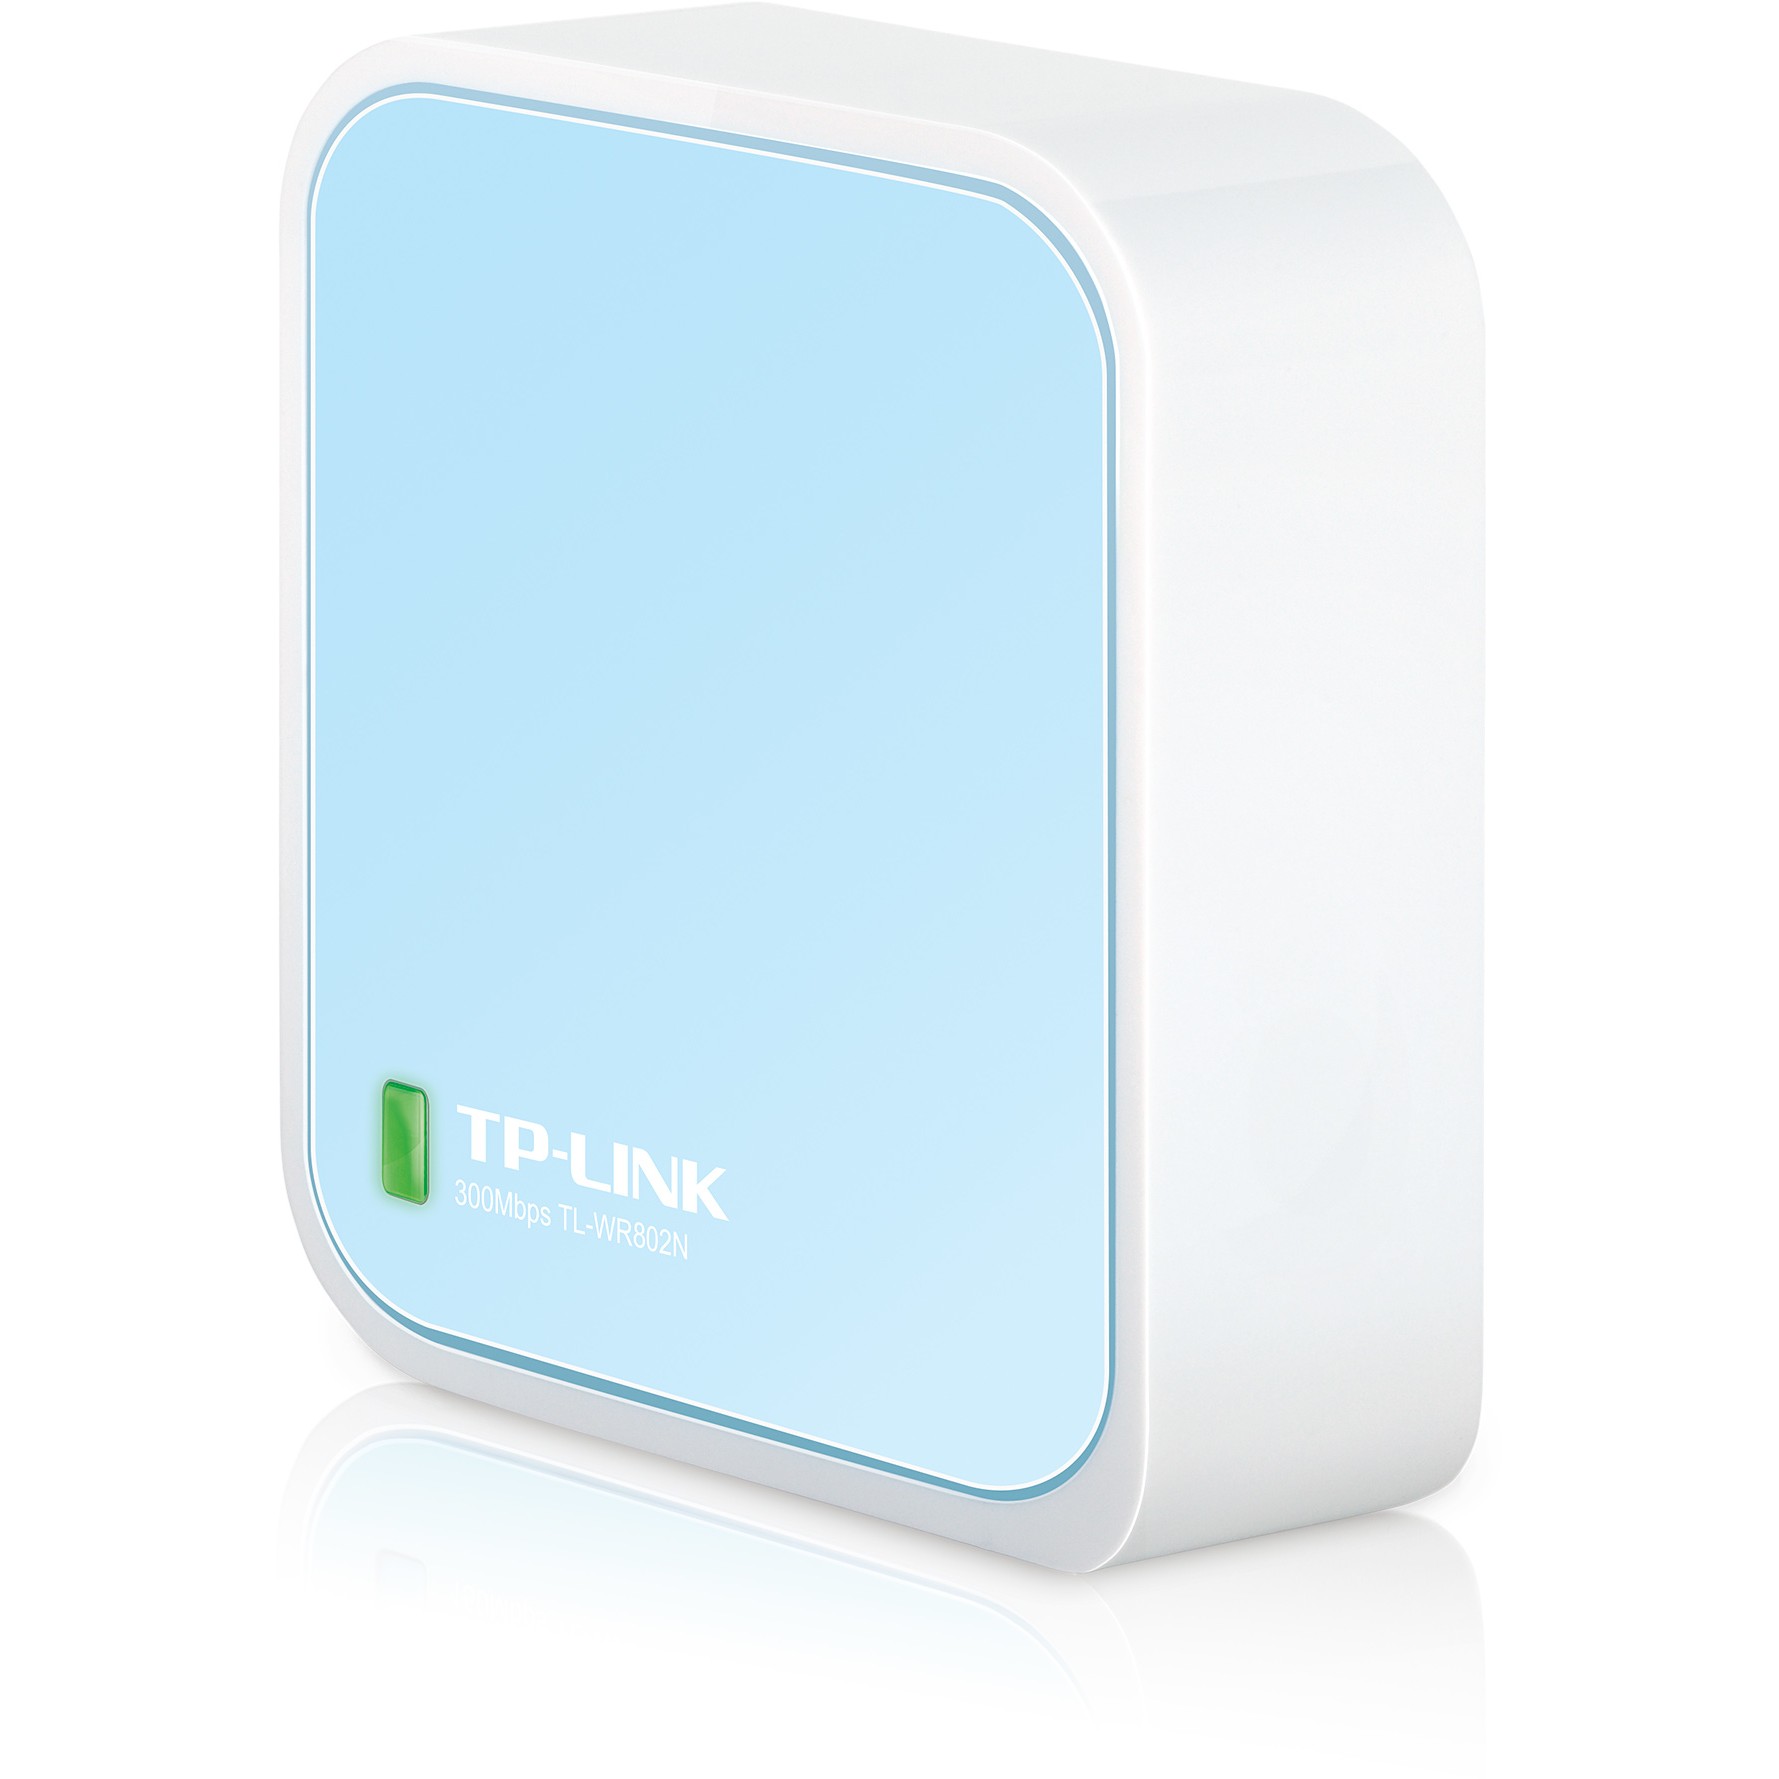 TP-Link TL-WR802N wireless router